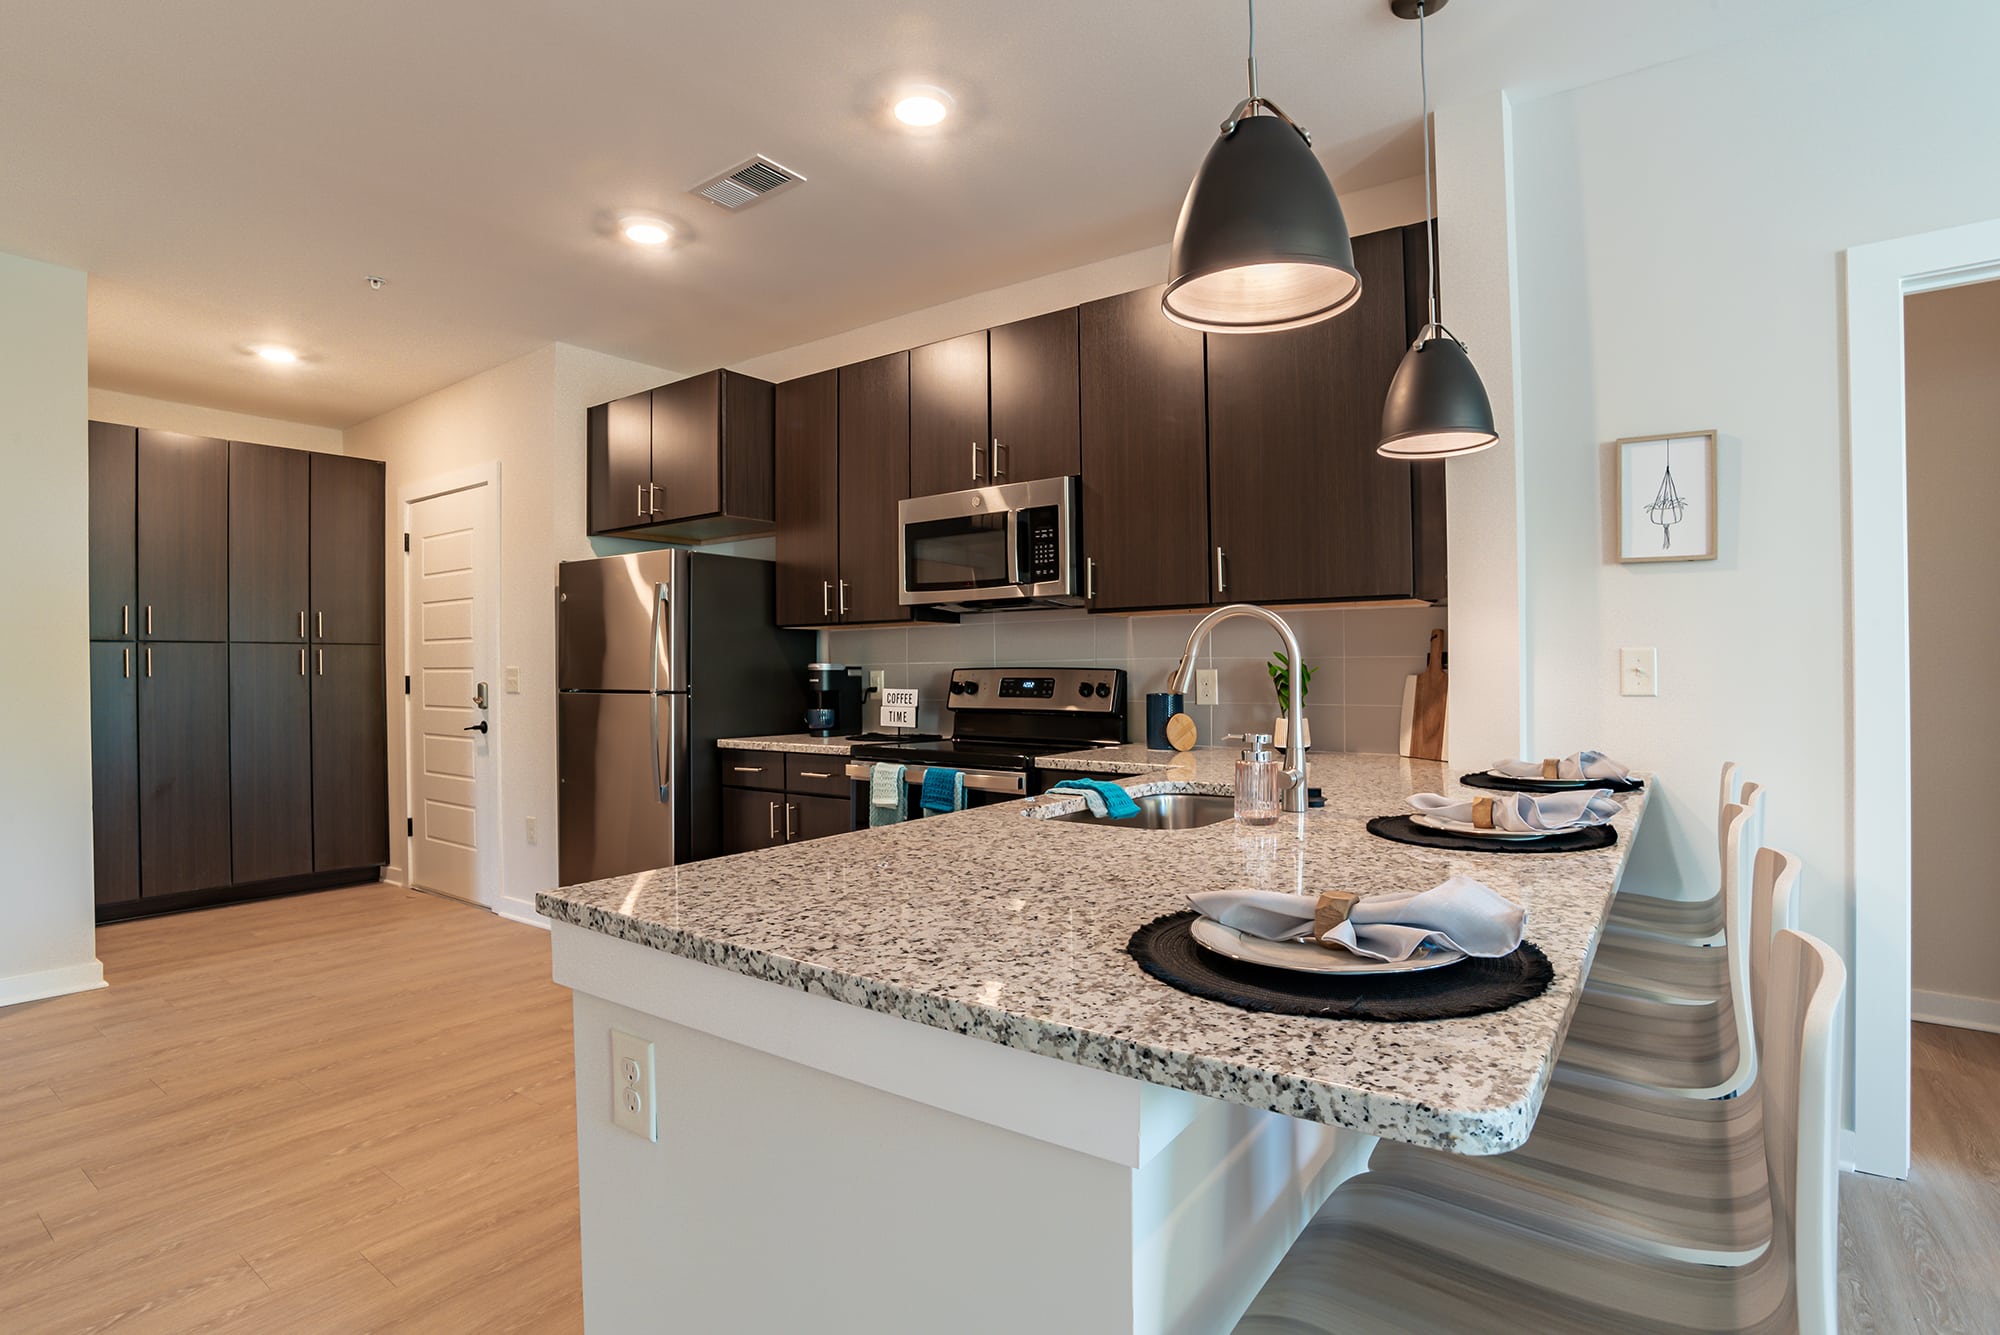 the edition on rosemary apartments near unc chapel hill spacious kitchen